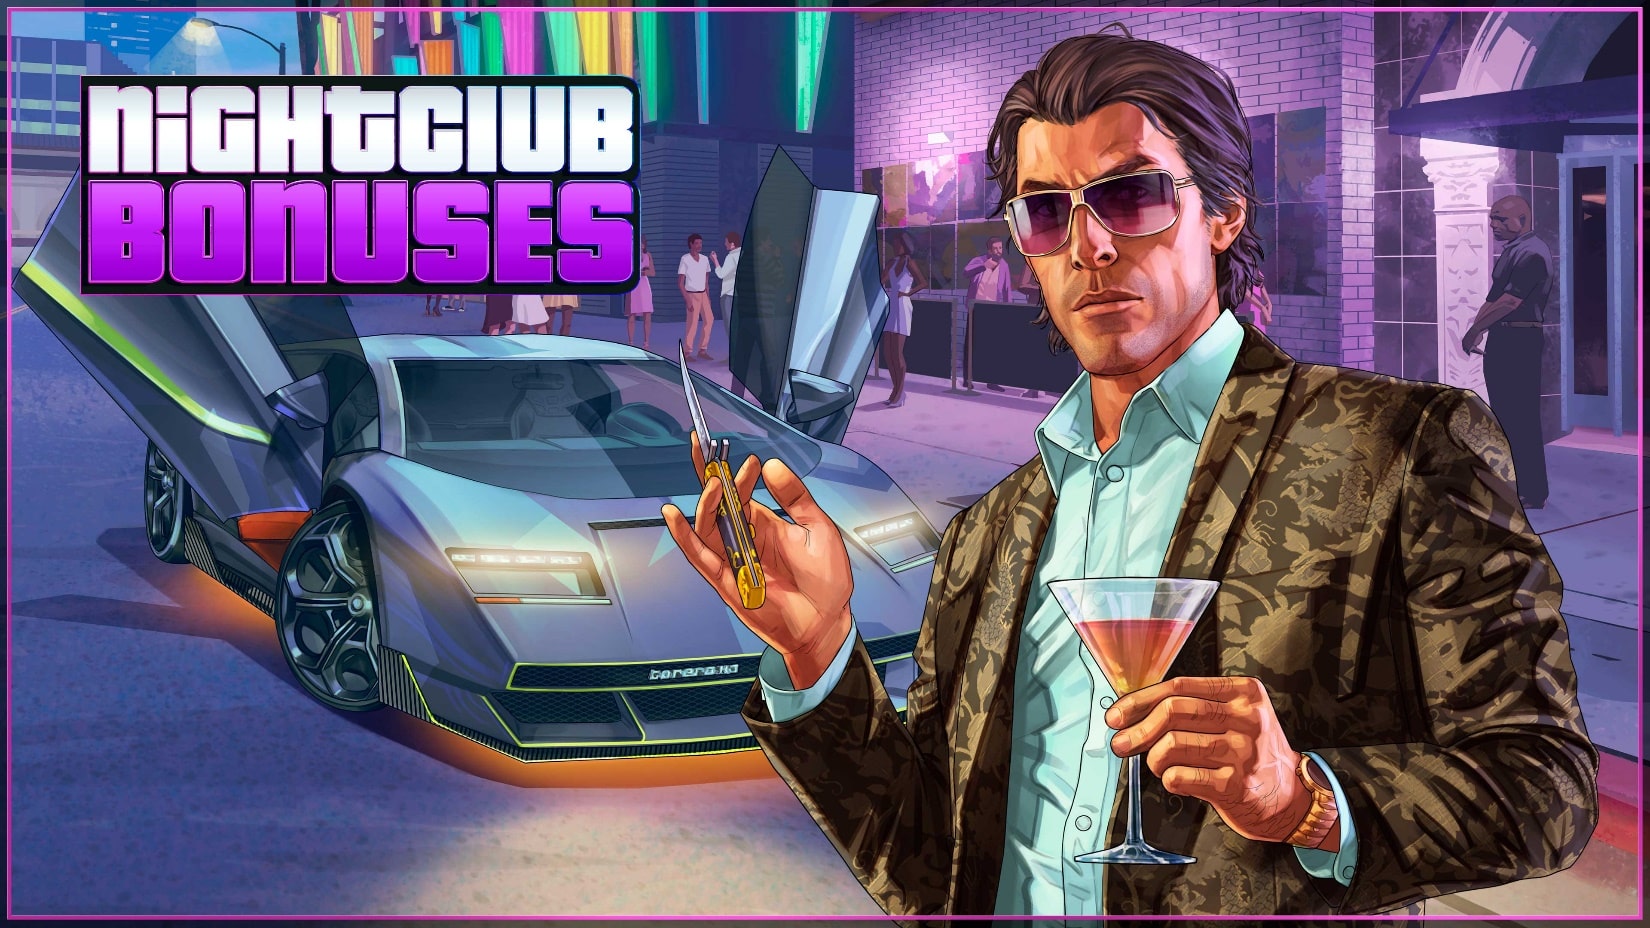 My Offers / Socialclub Members Exclusive Offer - GTA Online